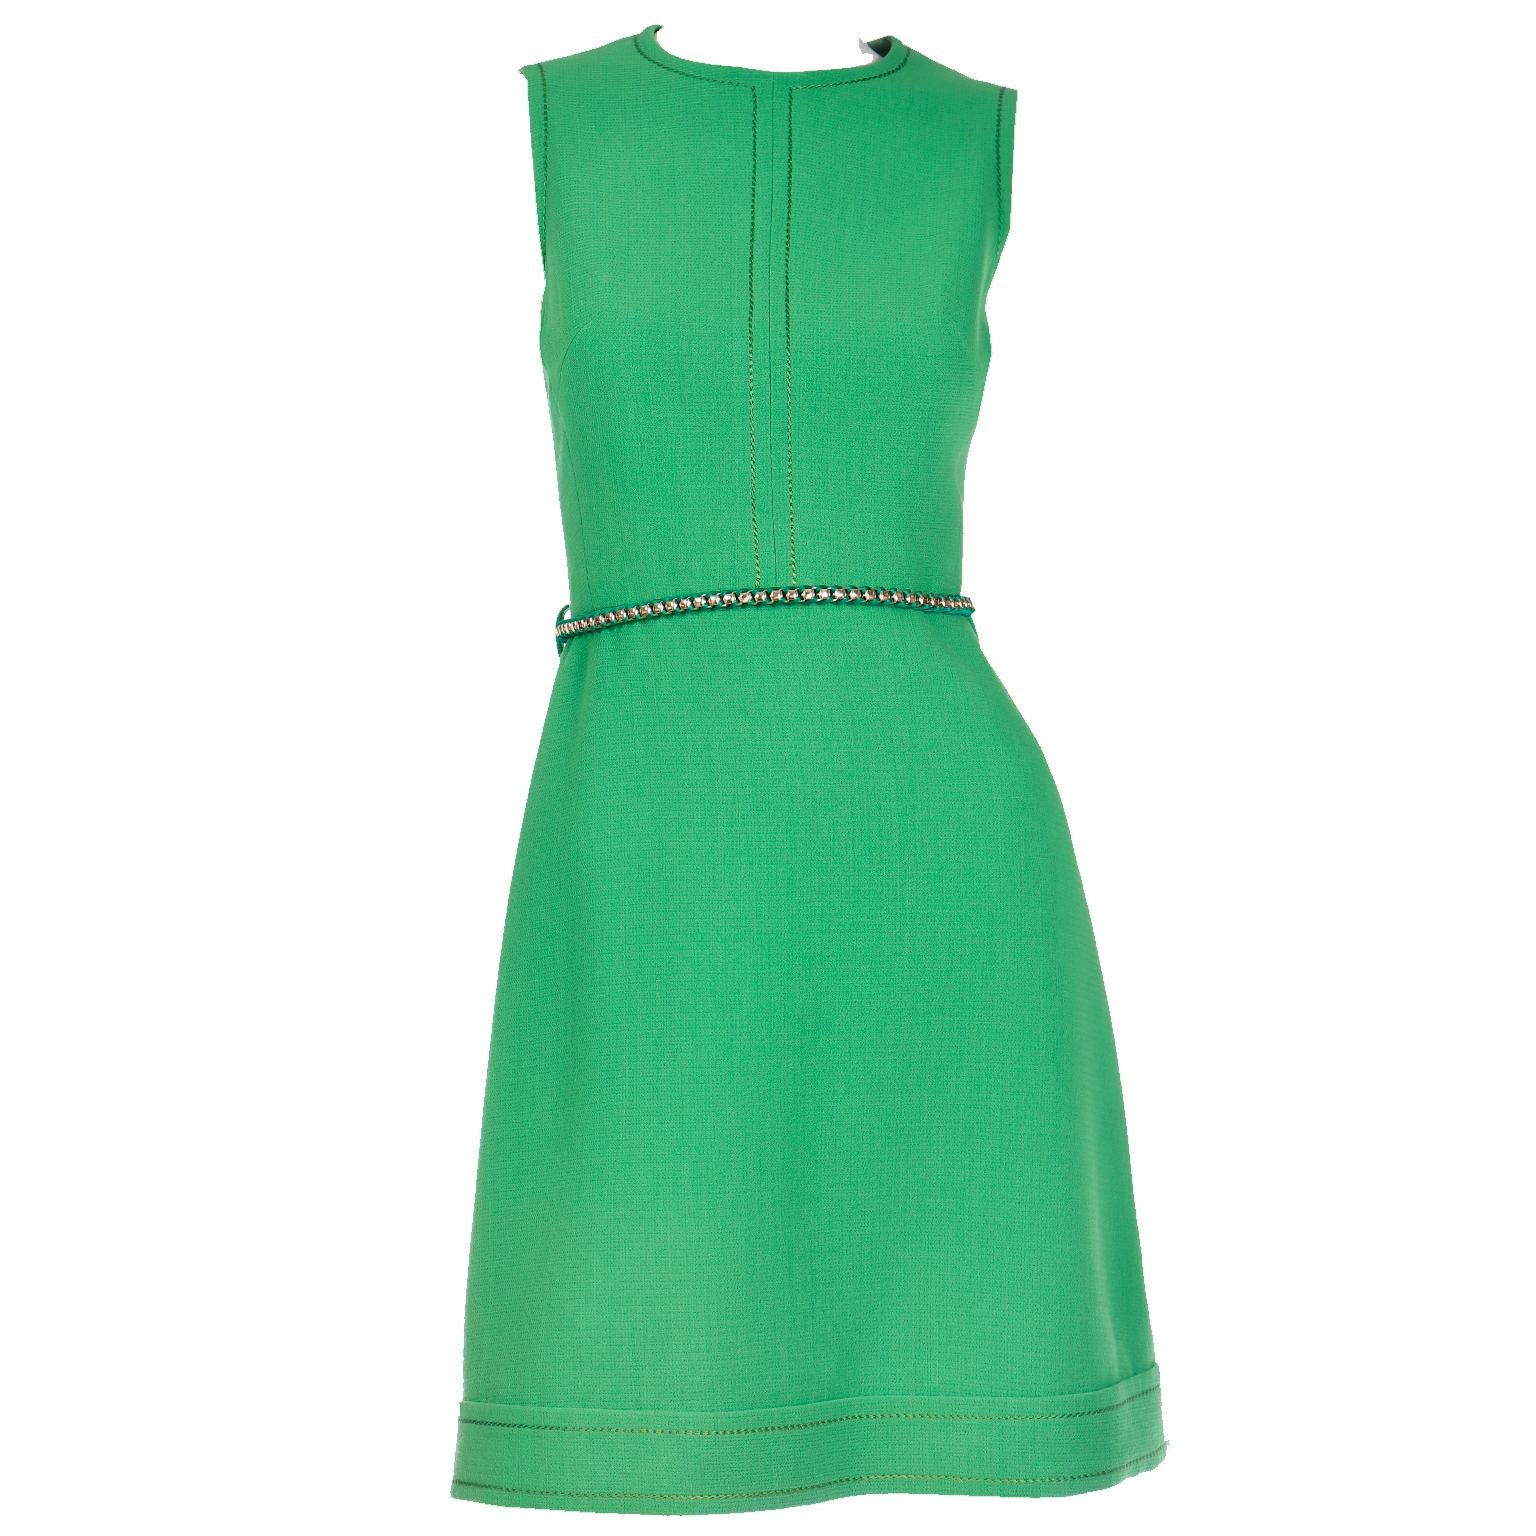 1960s Couture Veronese 414 Saint Honore Paris Vintage Green Sleeveless Dress For Sale 3